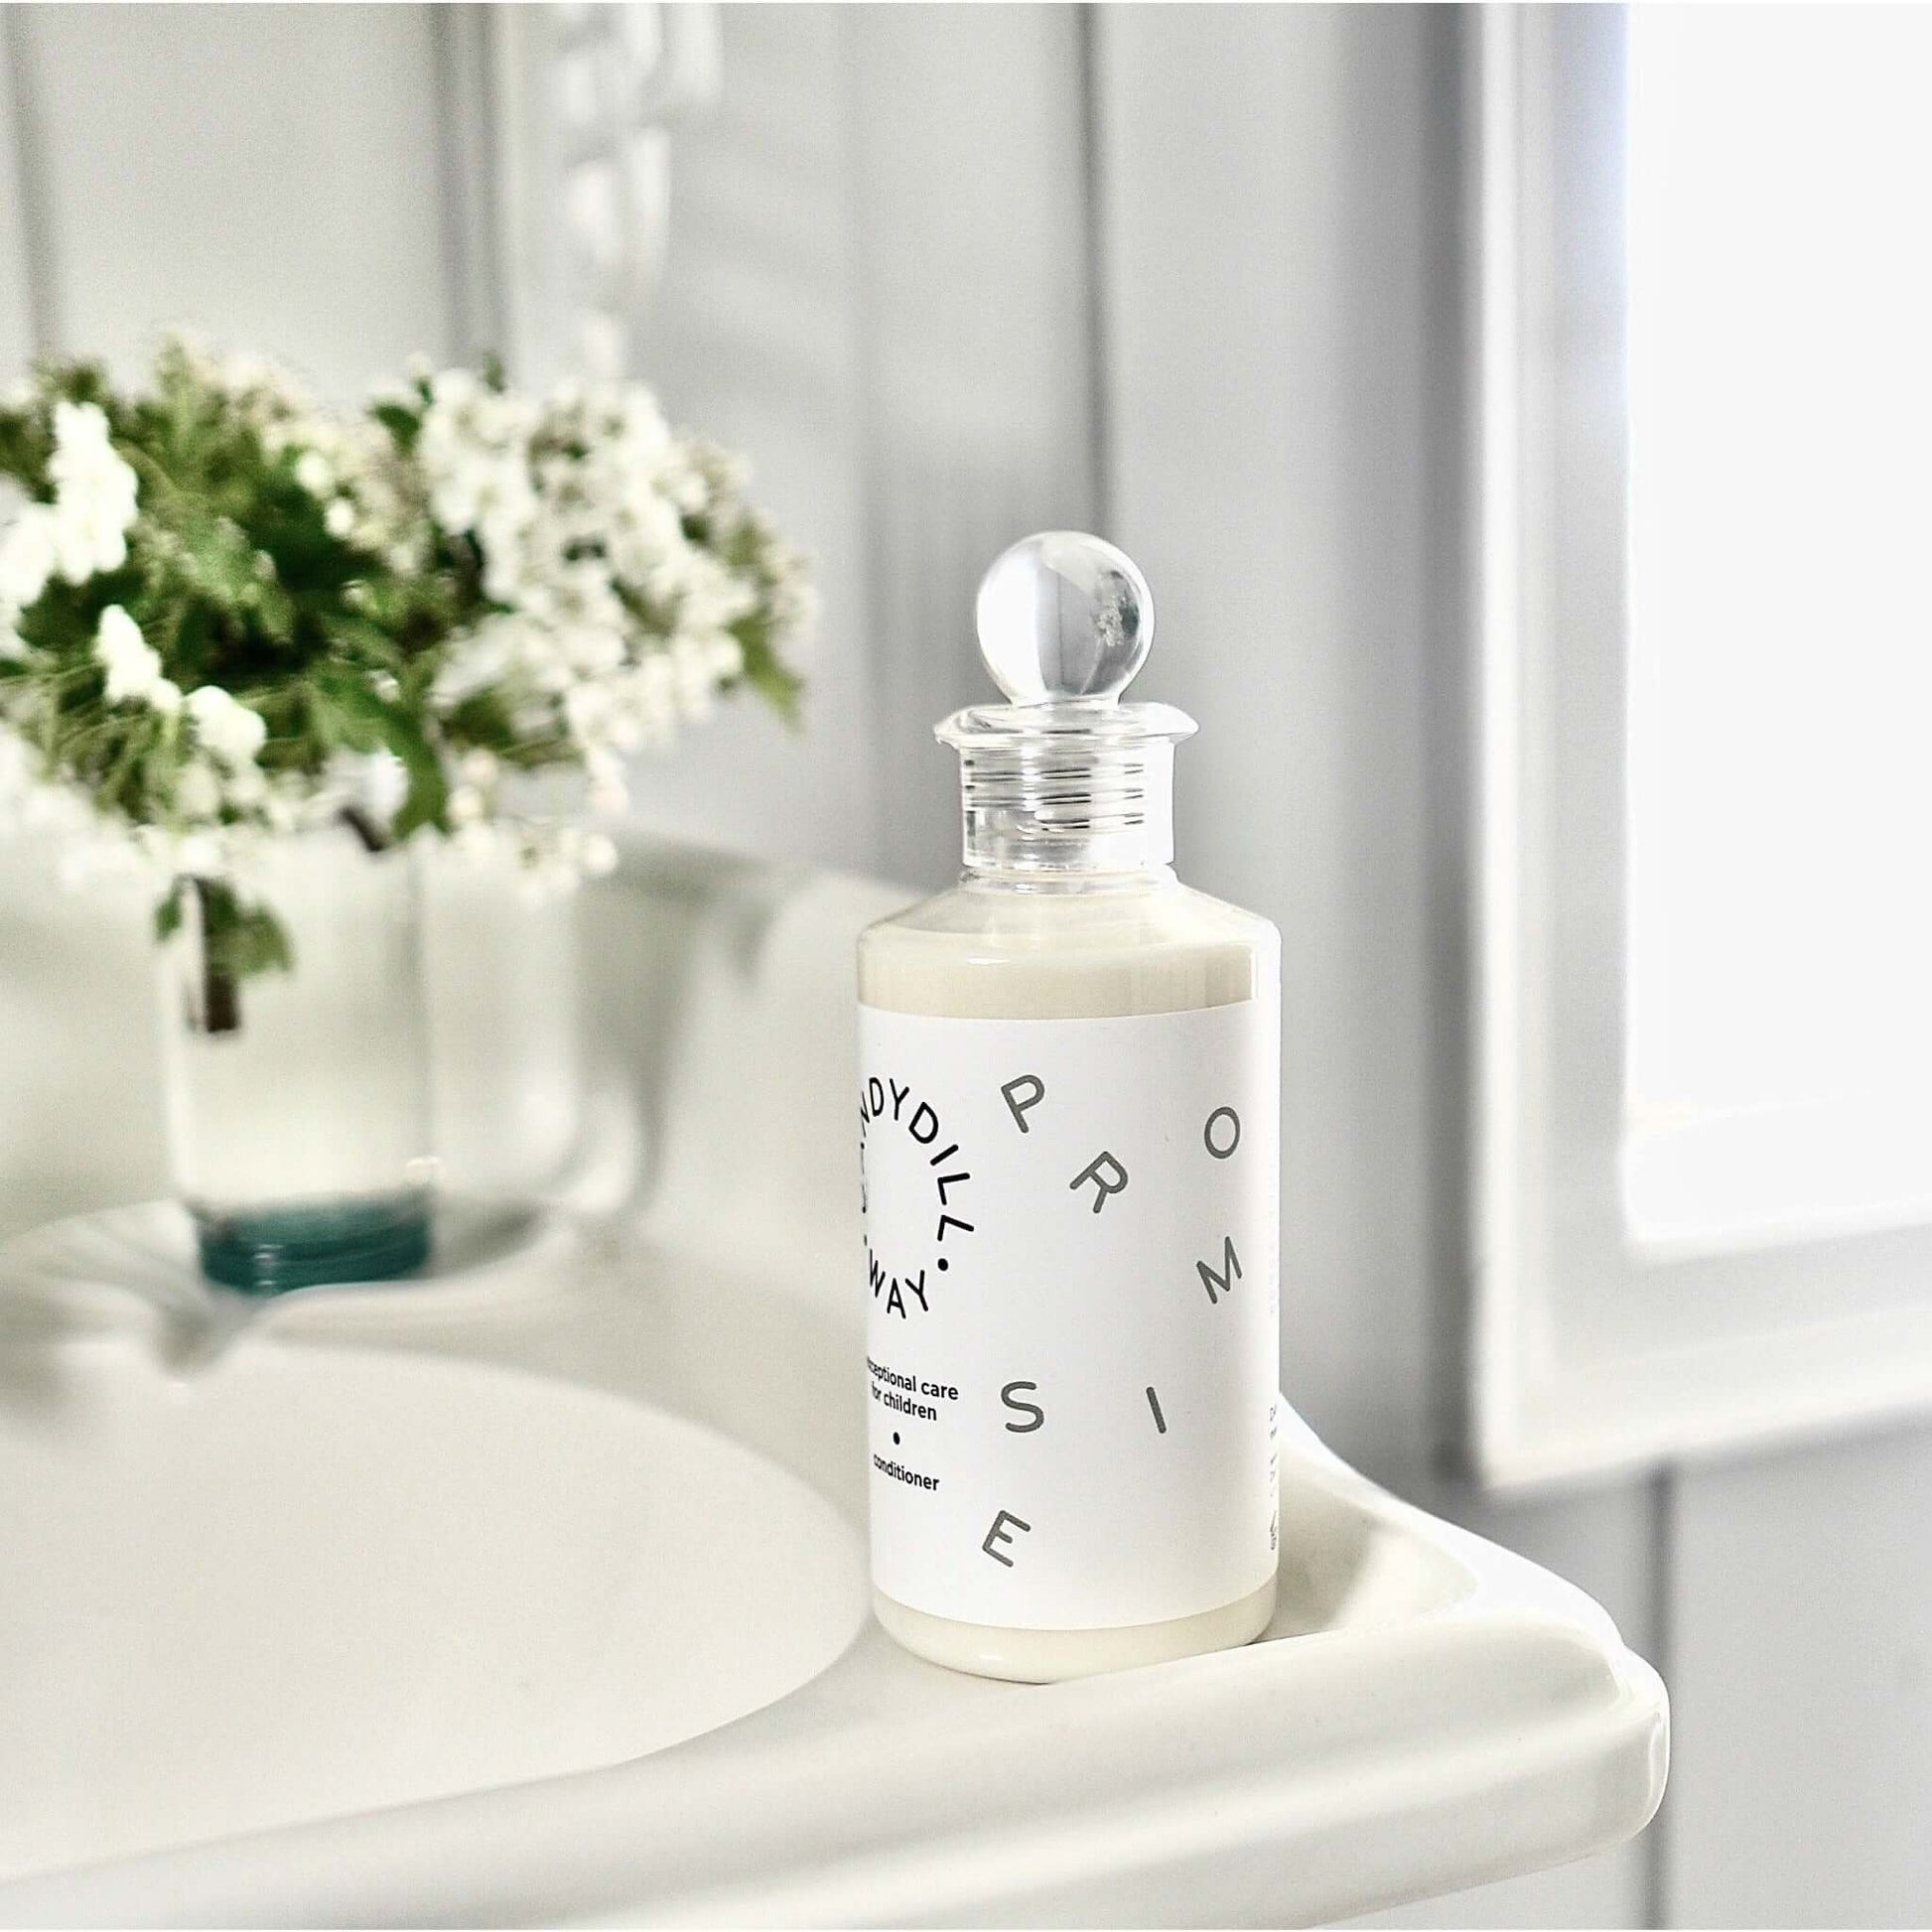 Wild Hawthorn Berry silicone free Hair Conditioner bottle with white hawthorn blossom on antique sink.